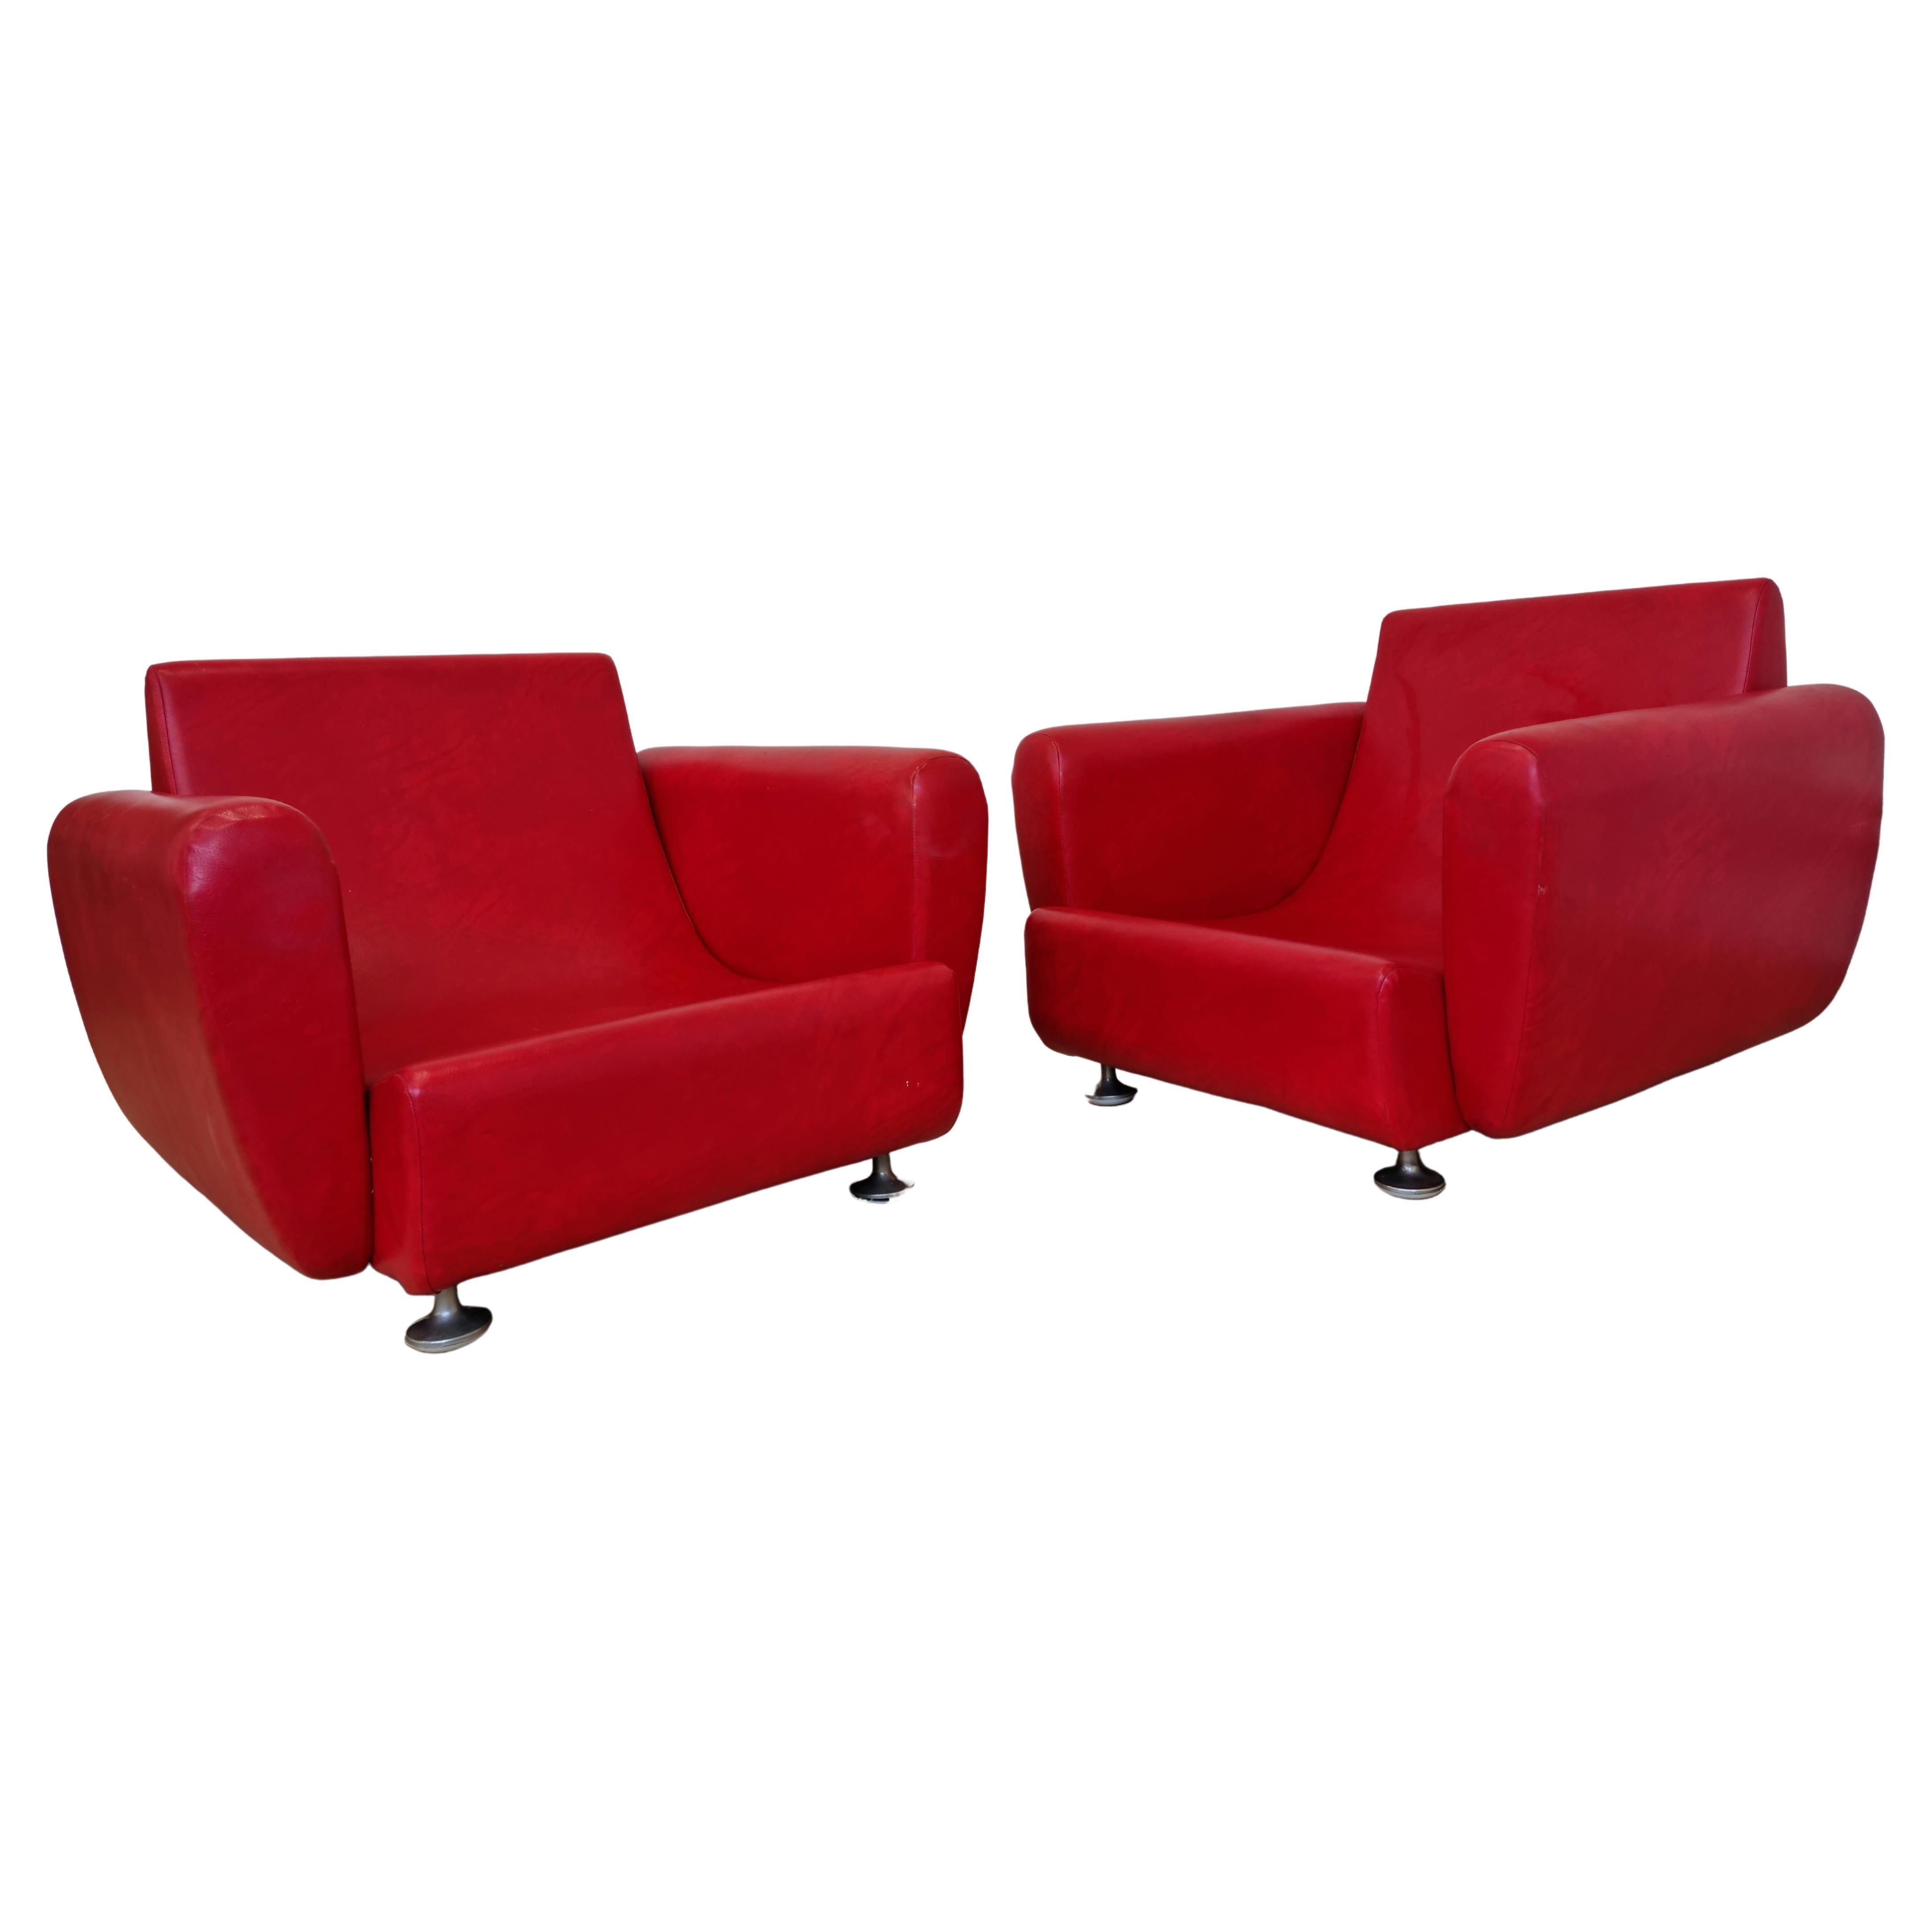 Pair of Rare Midcentury Red Armchairs For Sale